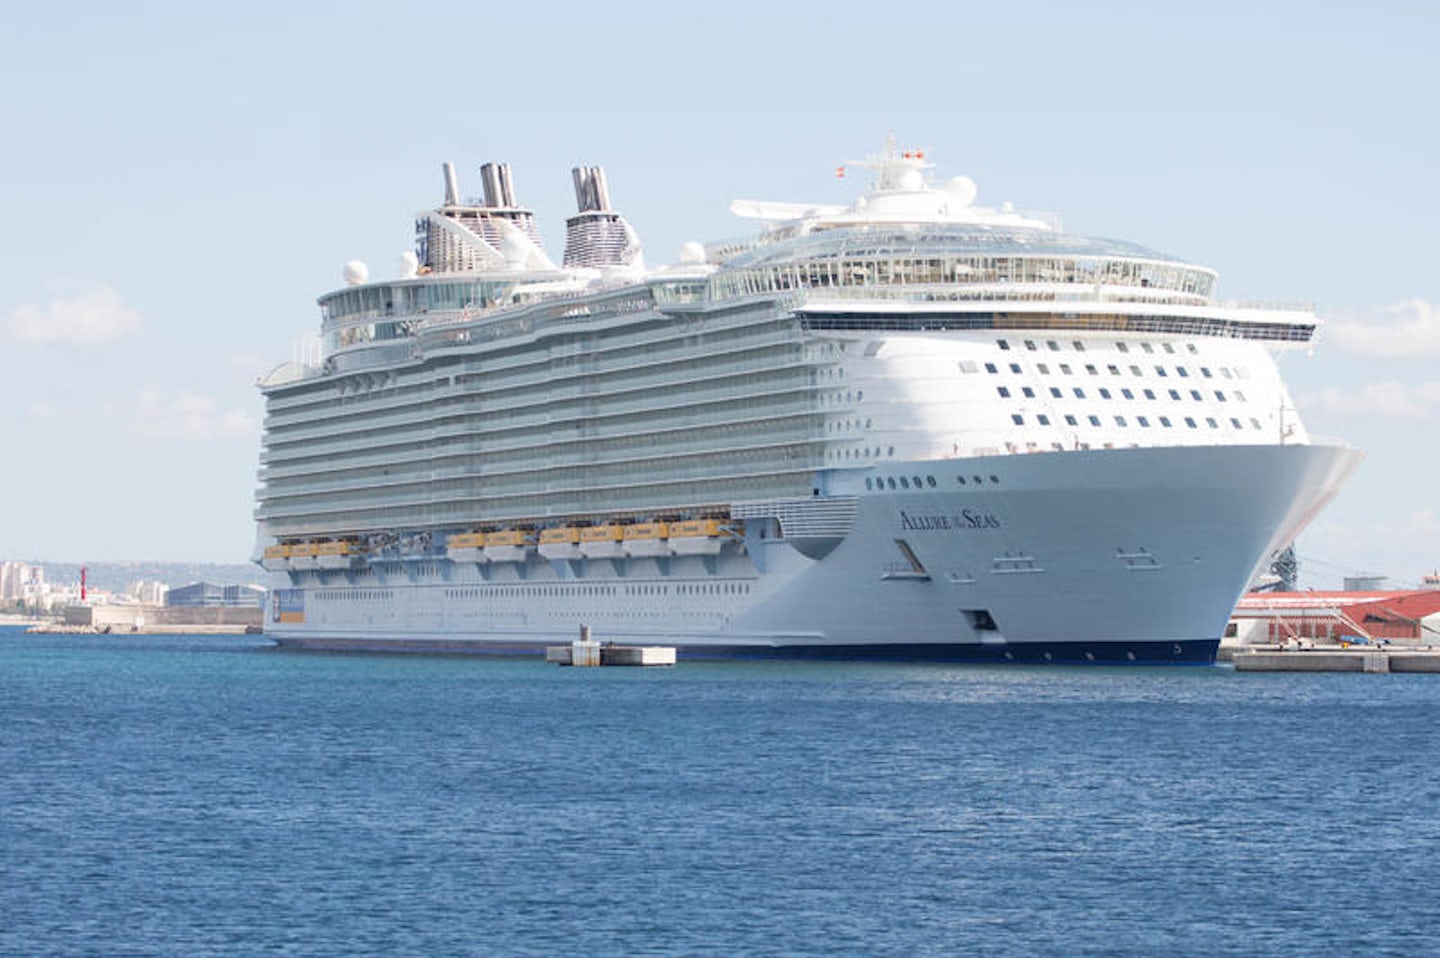 Ship Exterior on Allure of the Seas